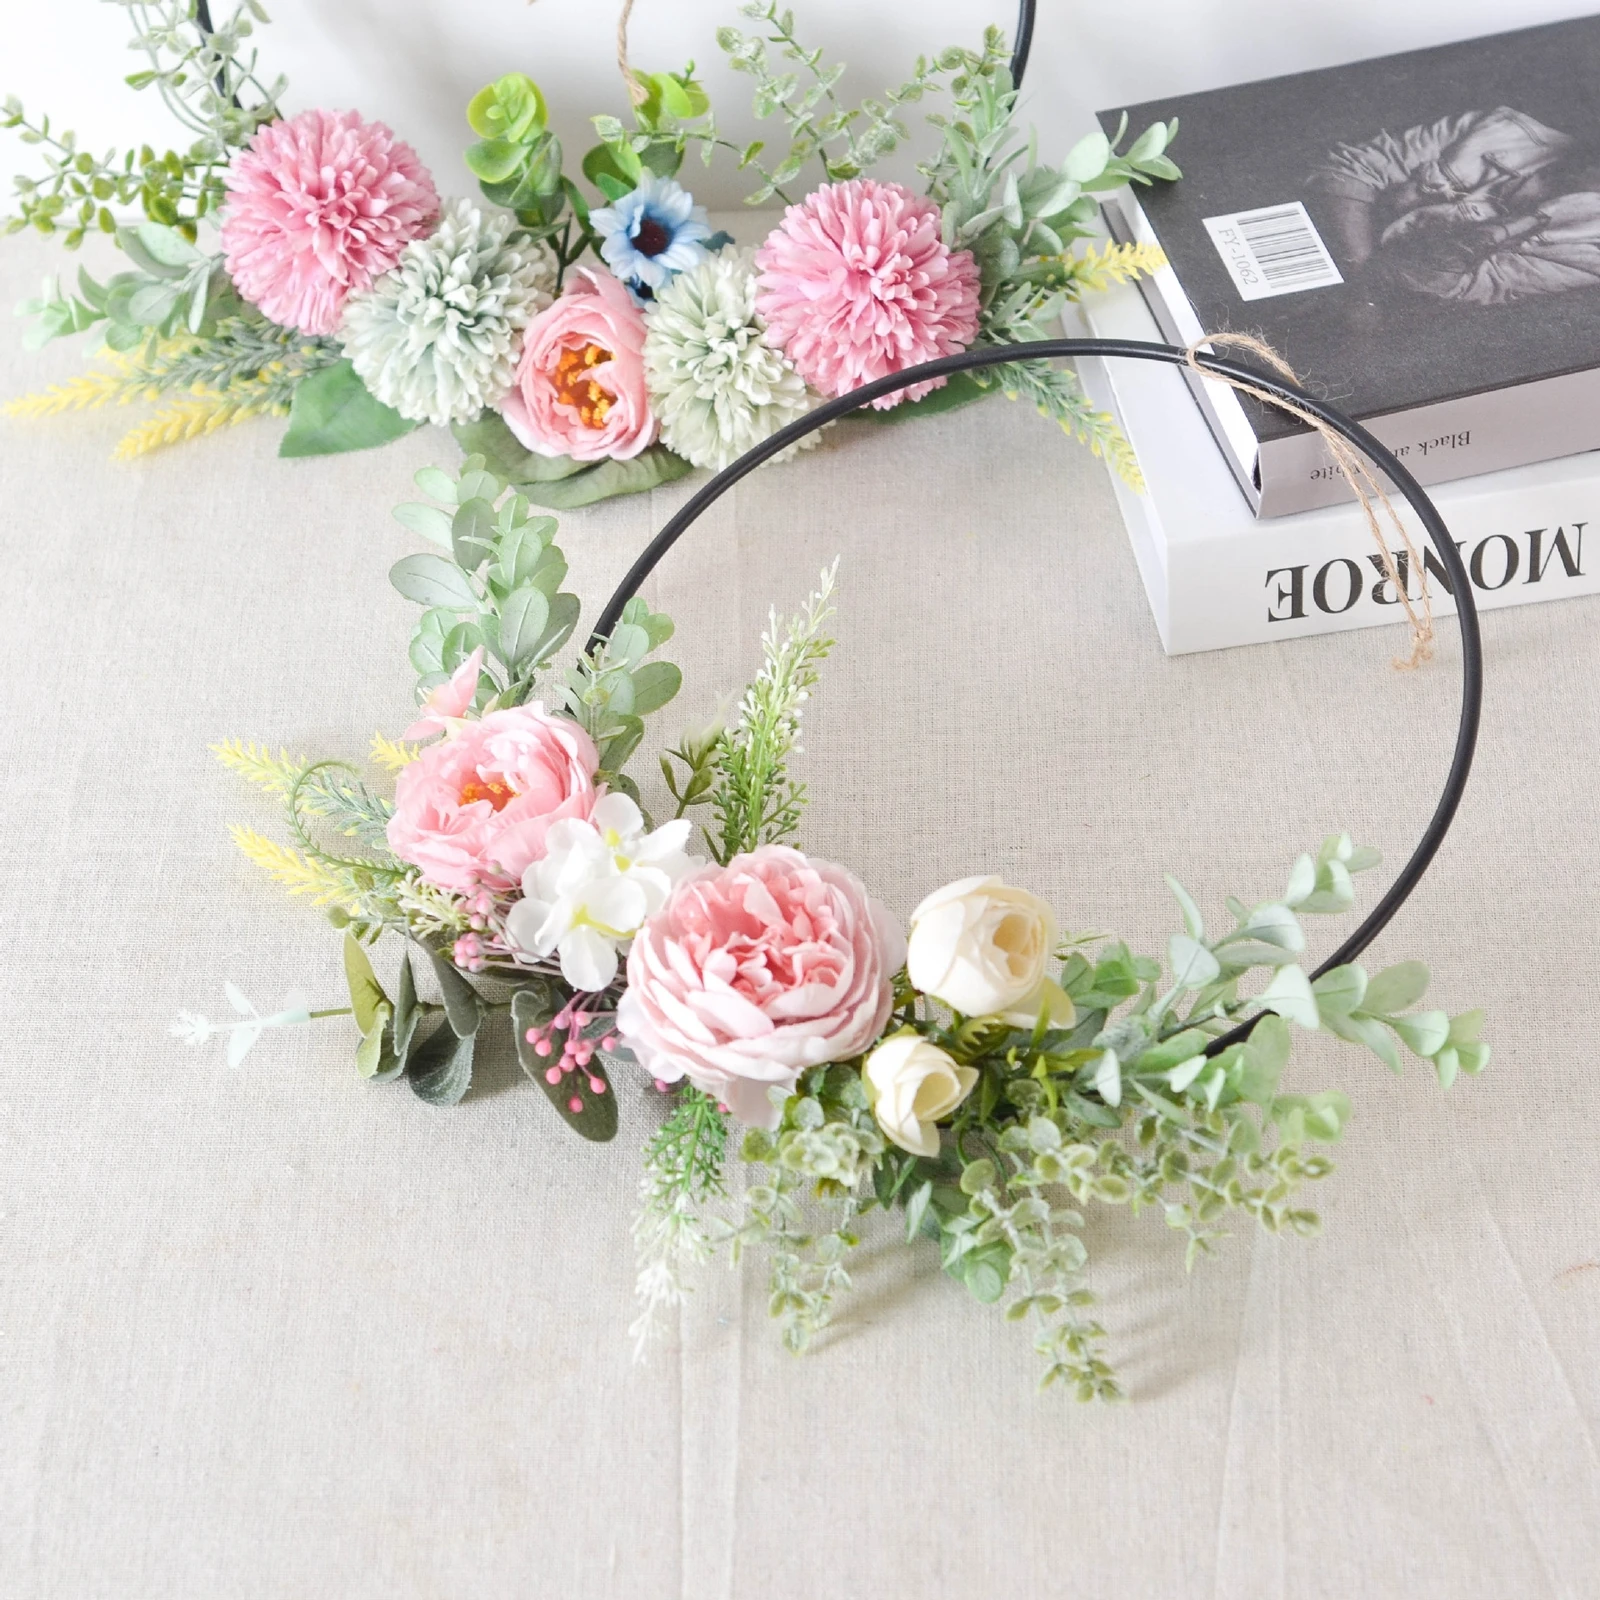 Details about   Flower Welcome Sign Hanging Floral Hoop Wreath Craft Ornament Decoration 